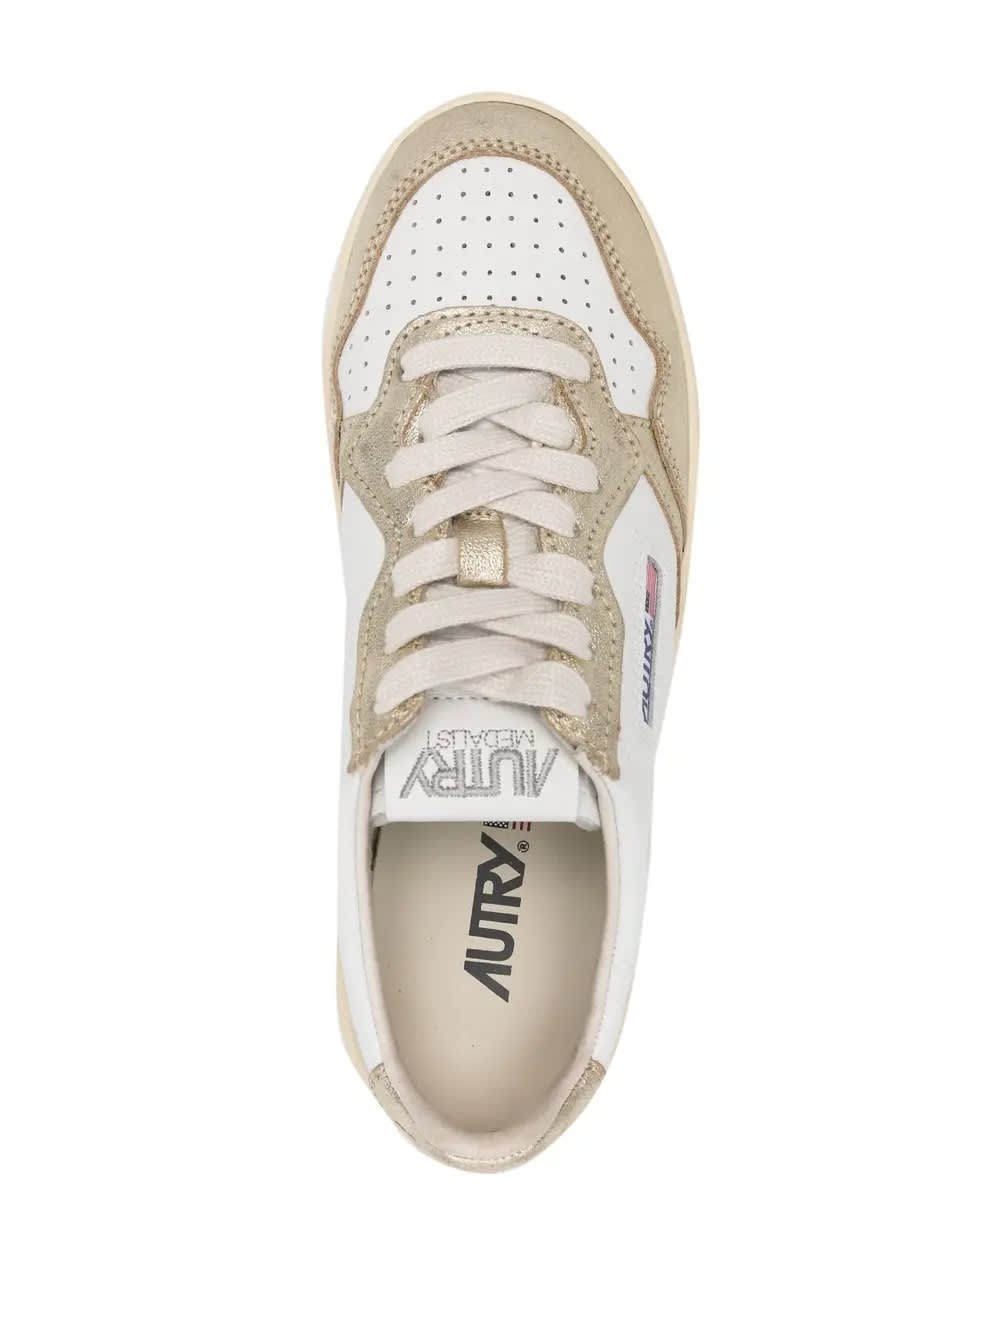 Shop Autry White And Gold Medalist Platform Low Sneakers